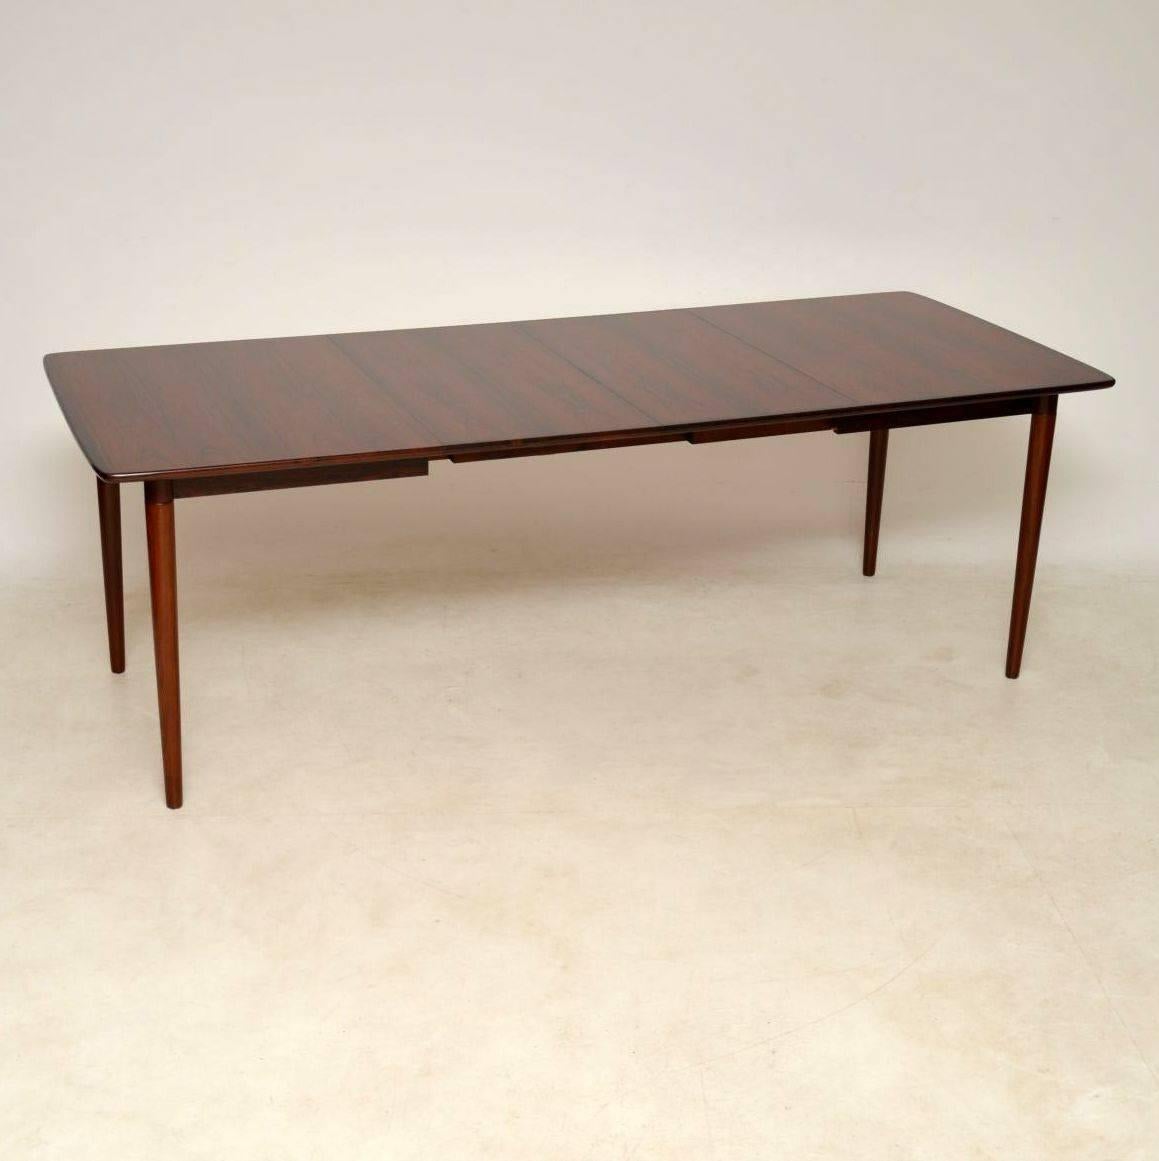 Norwegian 1960s Vintage Dining Table by Rastad & Relling for Bahus